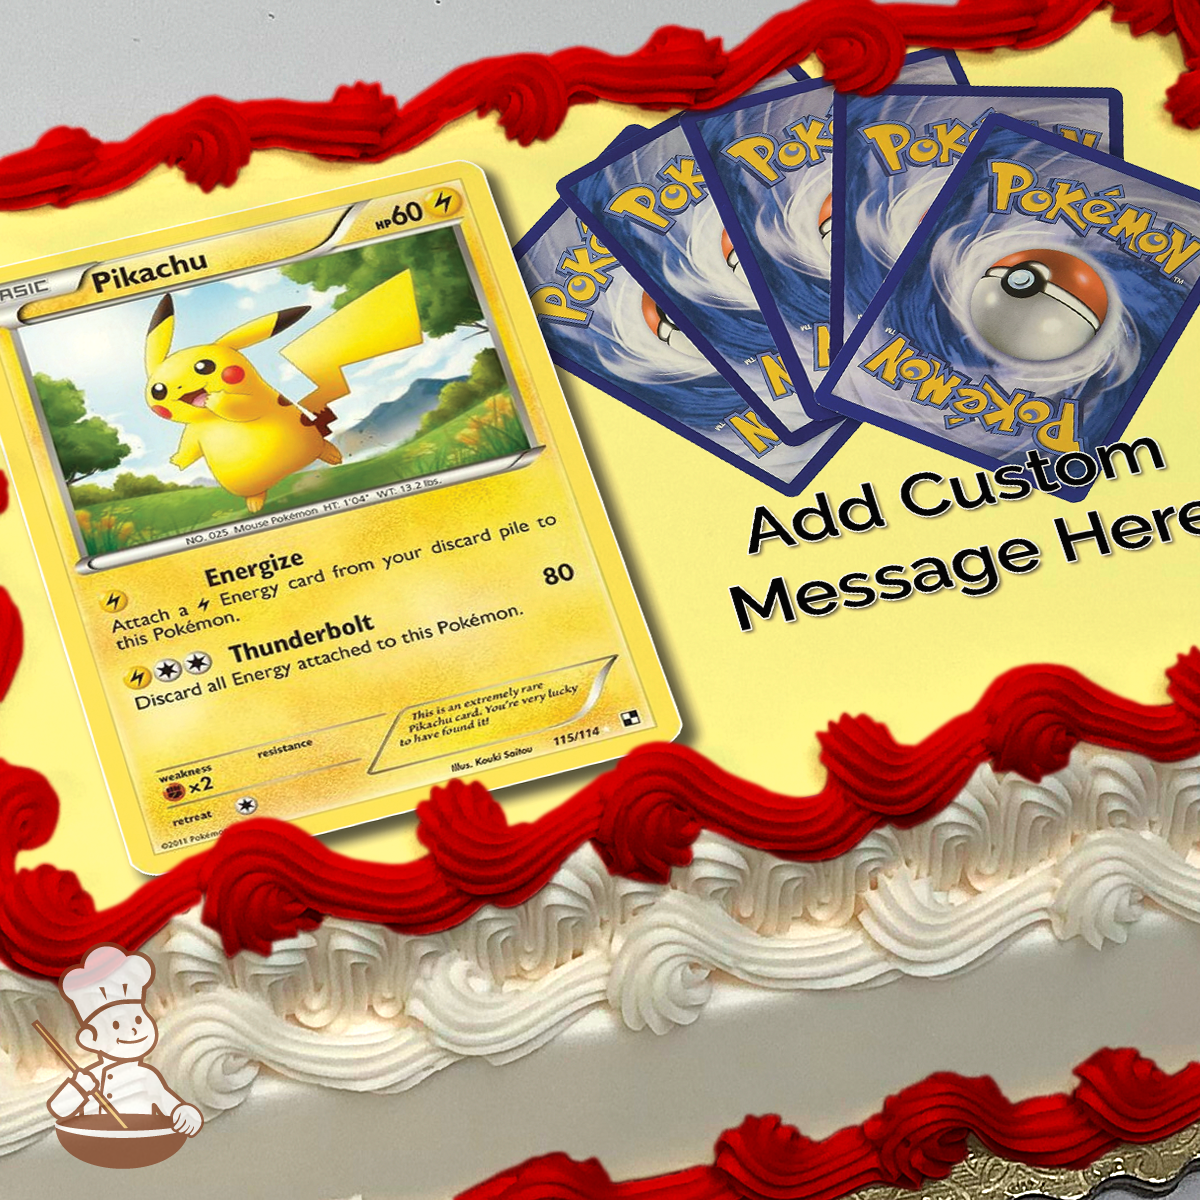 Pikachu player card with Pokemon cards printed on extra cake layer and decorated on rectangle sheet cake.